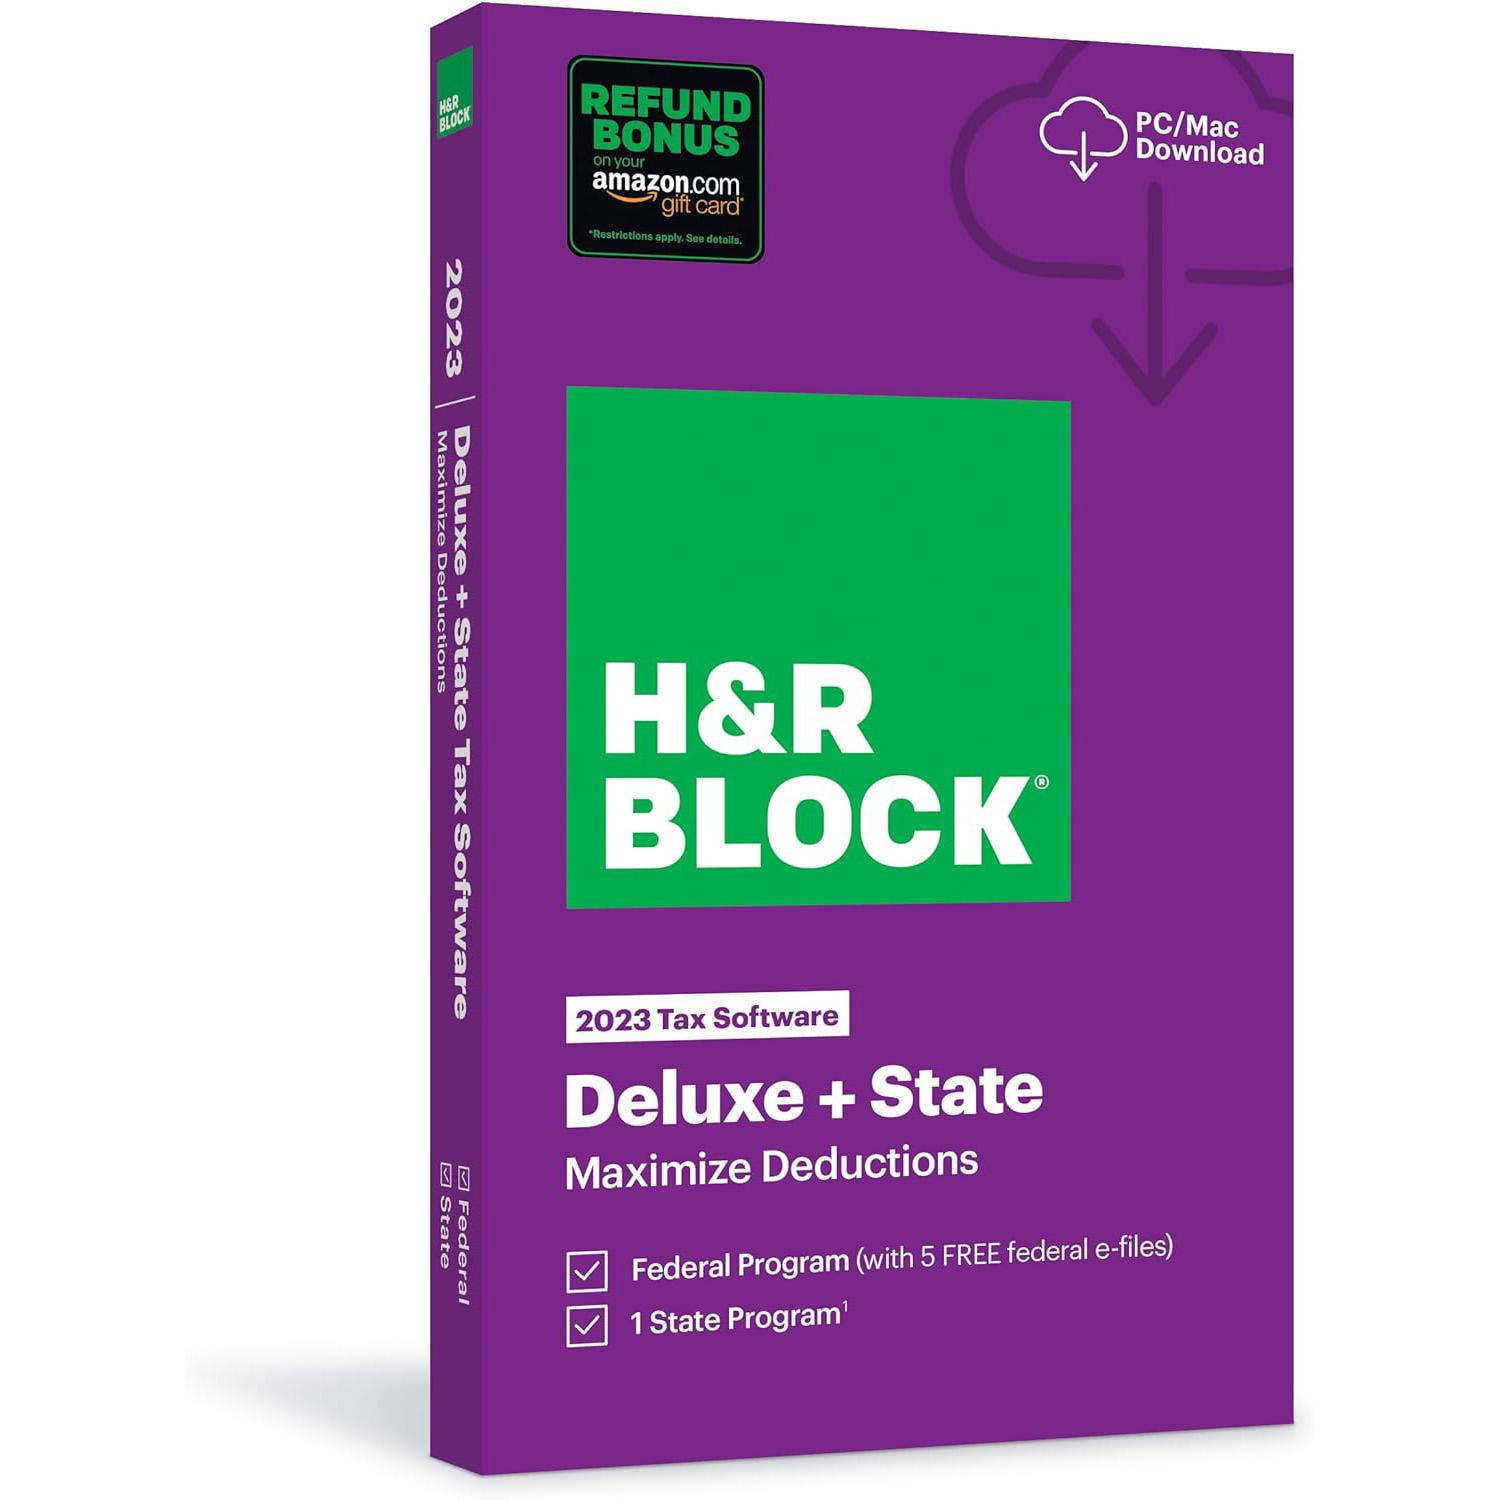 HR Block Tax Software Deluxe with State 2023 for $24.99 Shipped